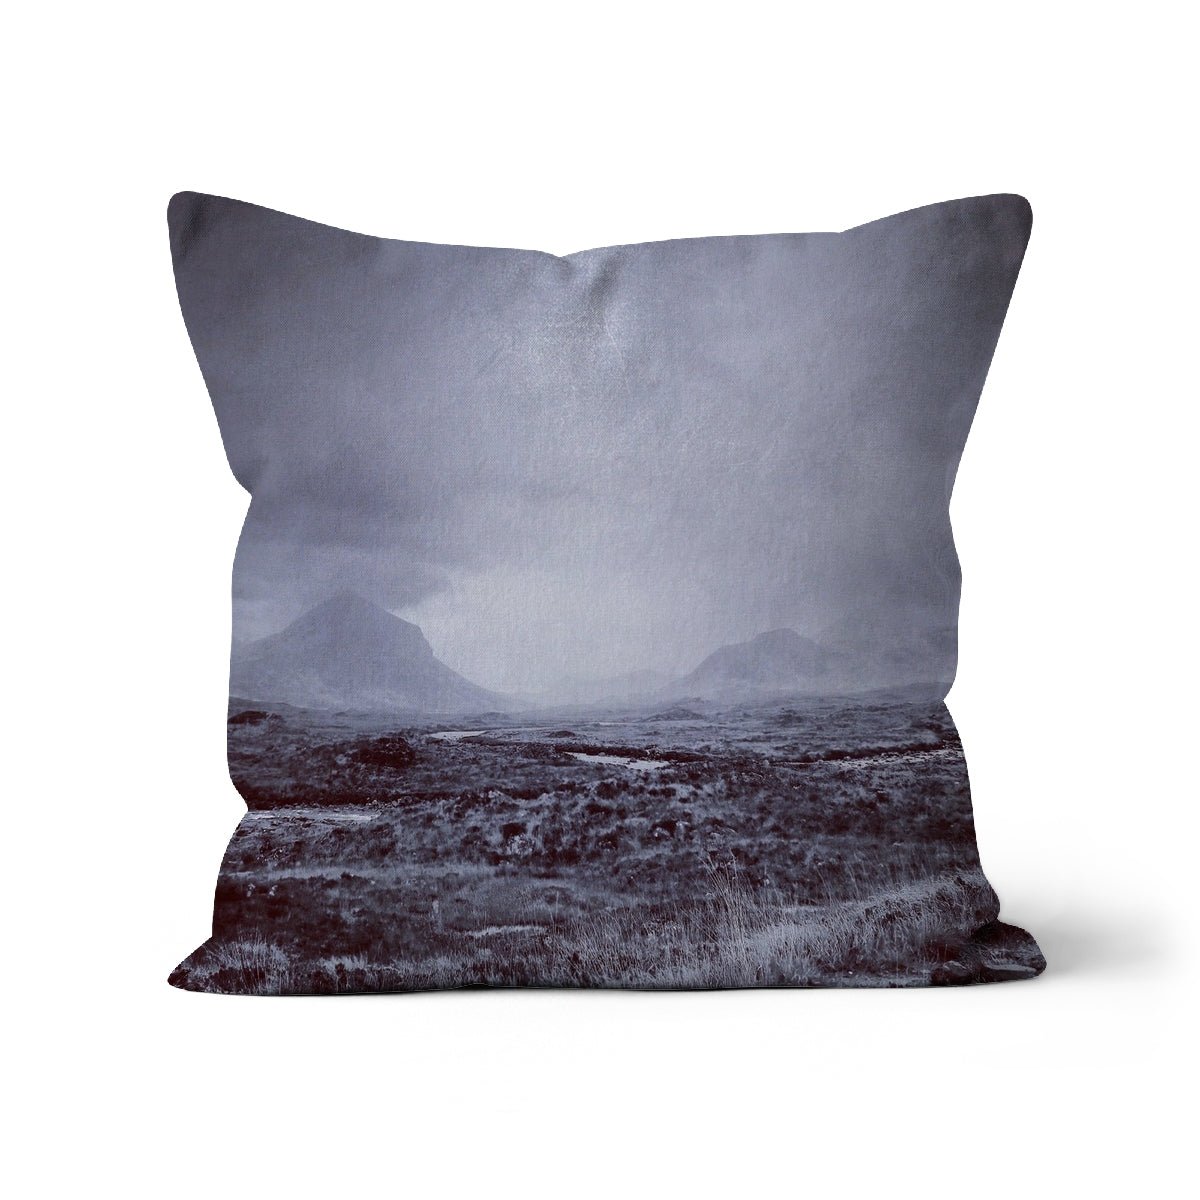 The Brooding Cuillin Skye Art Gifts Cushion-Cushions-Skye Art Gallery-Linen-12"x12"-Paintings, Prints, Homeware, Art Gifts From Scotland By Scottish Artist Kevin Hunter